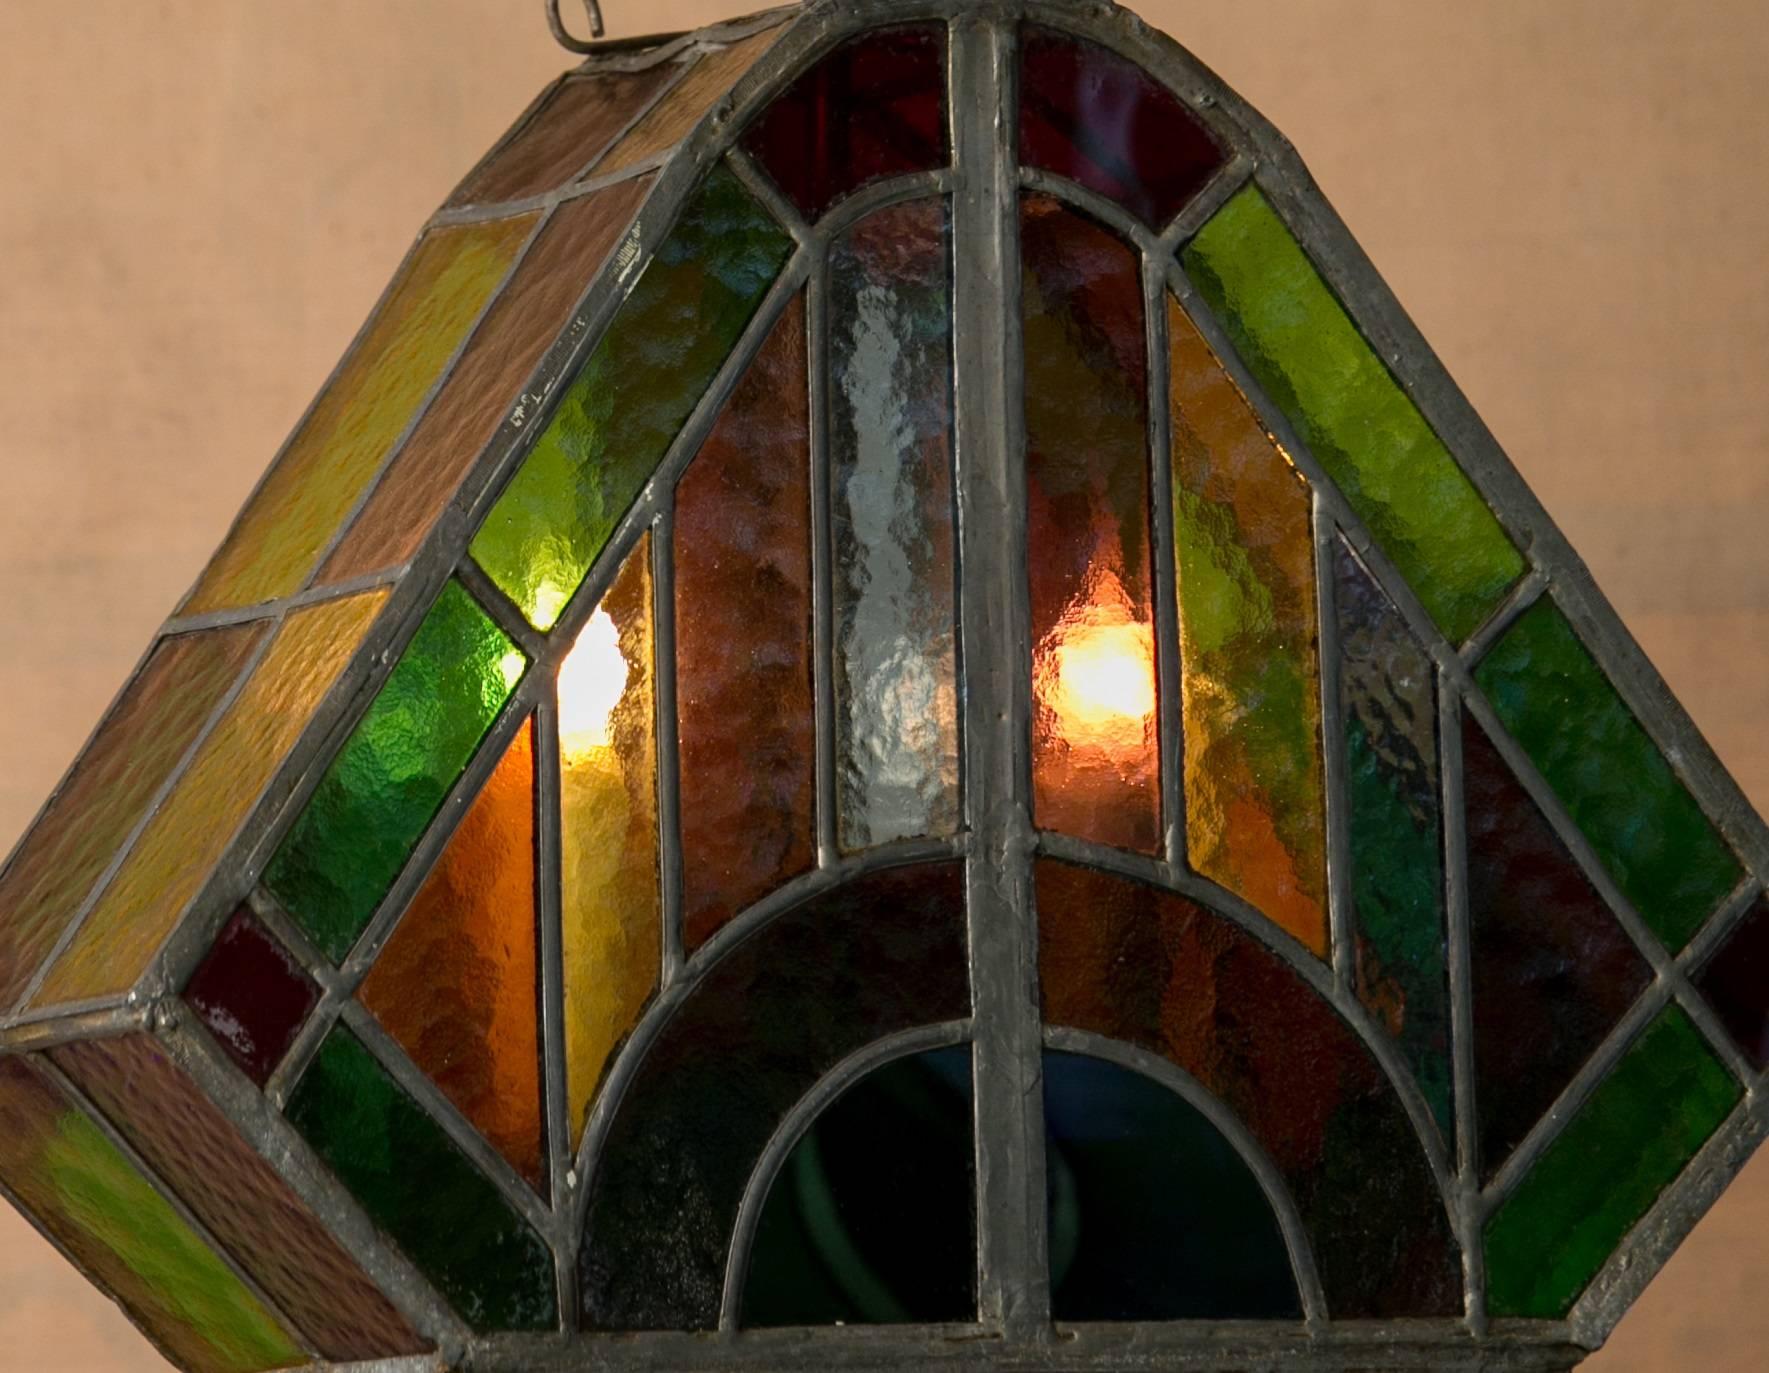 Quirky and charming multicolored stained glass, lead-seamed, triangular lantern from Holland, circa 1920. Newly re-wired for the USA with all UL-listed parts. handcrafted and colorful. Moody tone and light ambiance produced by the stained glass